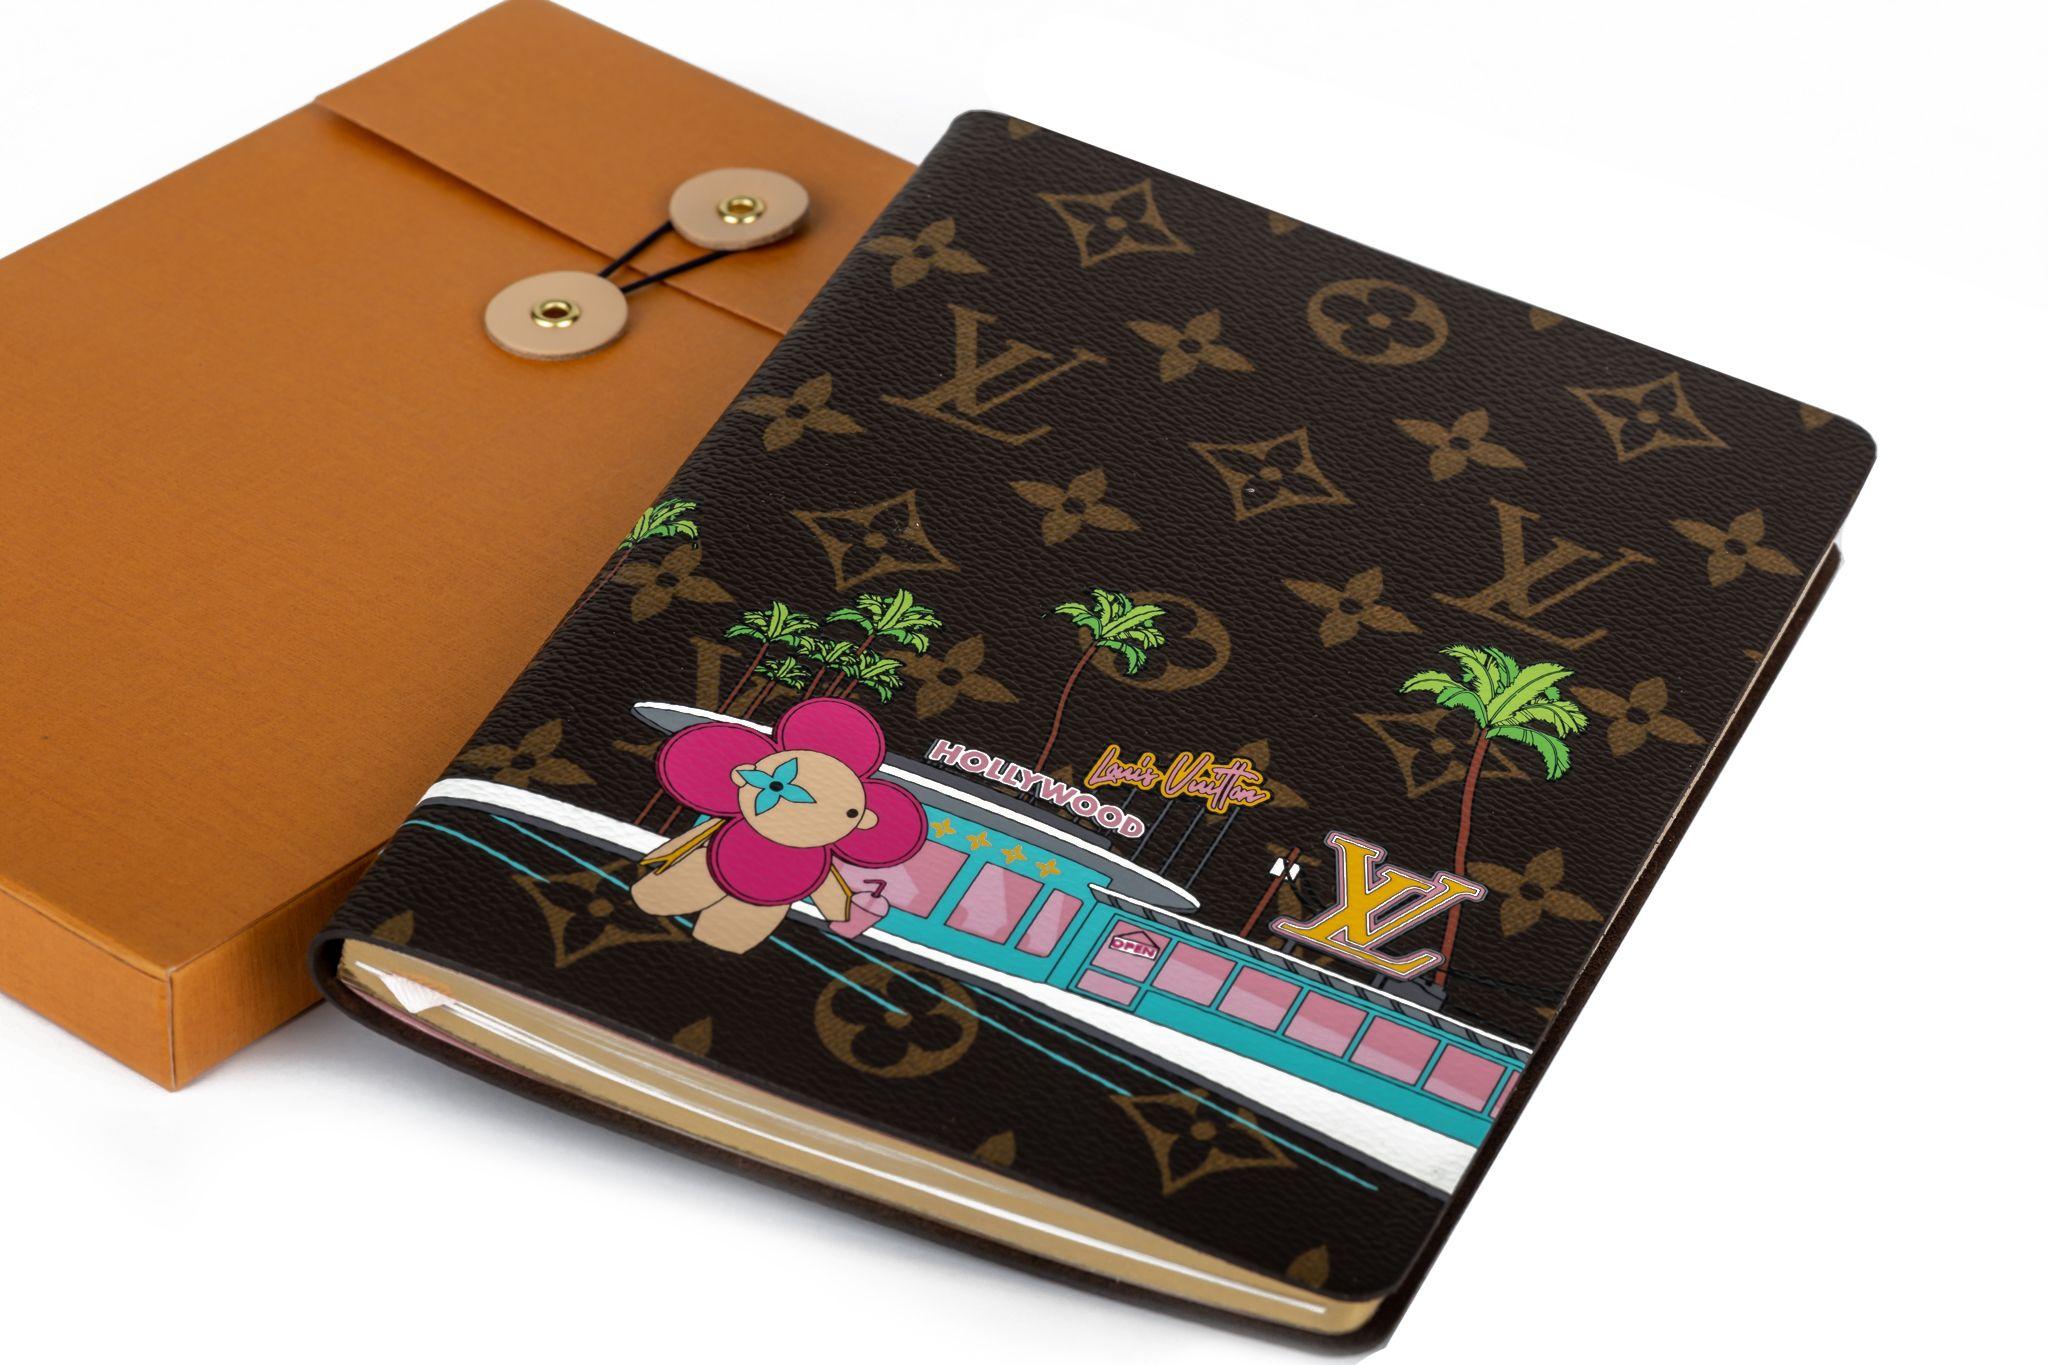 The Louis Vuitton Hollywood Xmas Clémence Notebook is a practical accessory that exudes a lighthearted spirit. It is crafted from Monogram canvas and decorated with playful illustrations of the Vivienne mascot and an adorable teddy bear enjoying